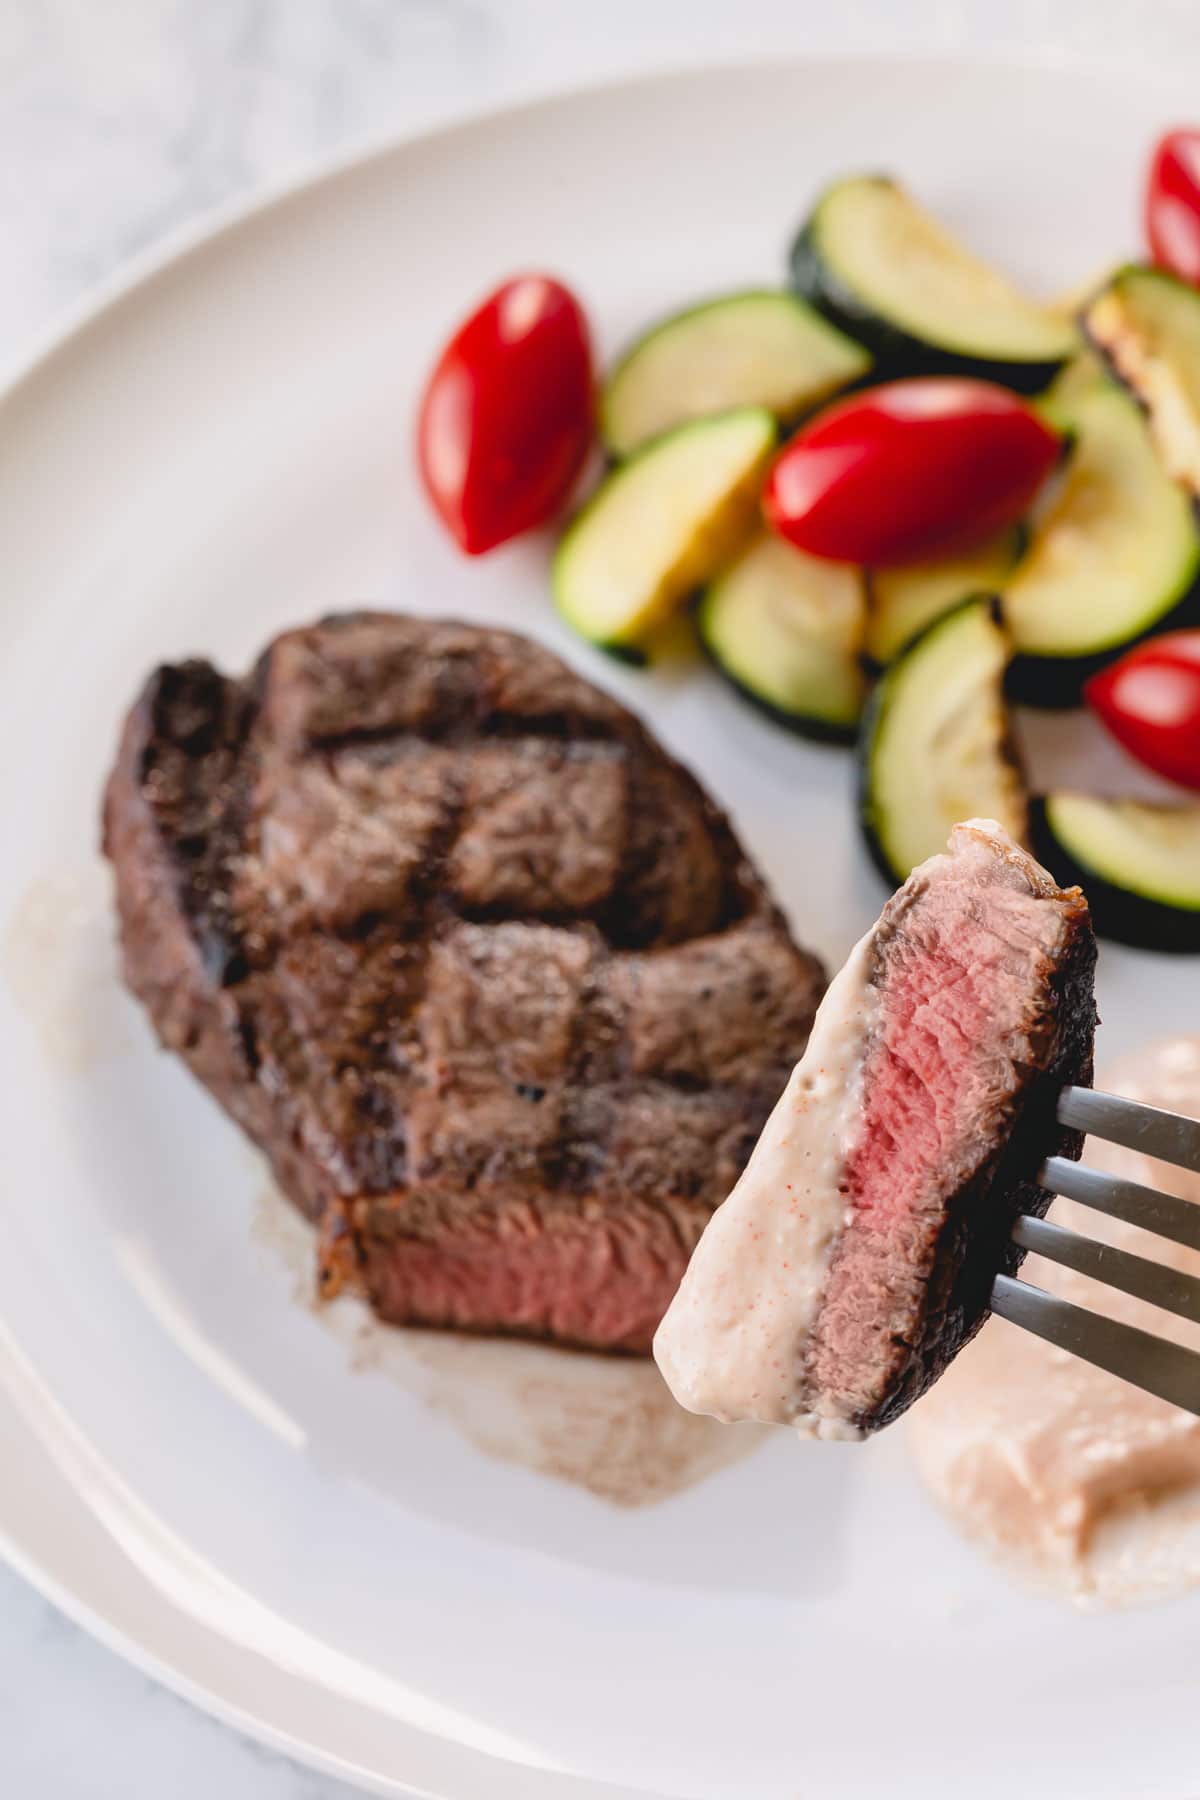 A whole grilled filet mignon on a white plate with zucchini and cherry tomatoes on the side.